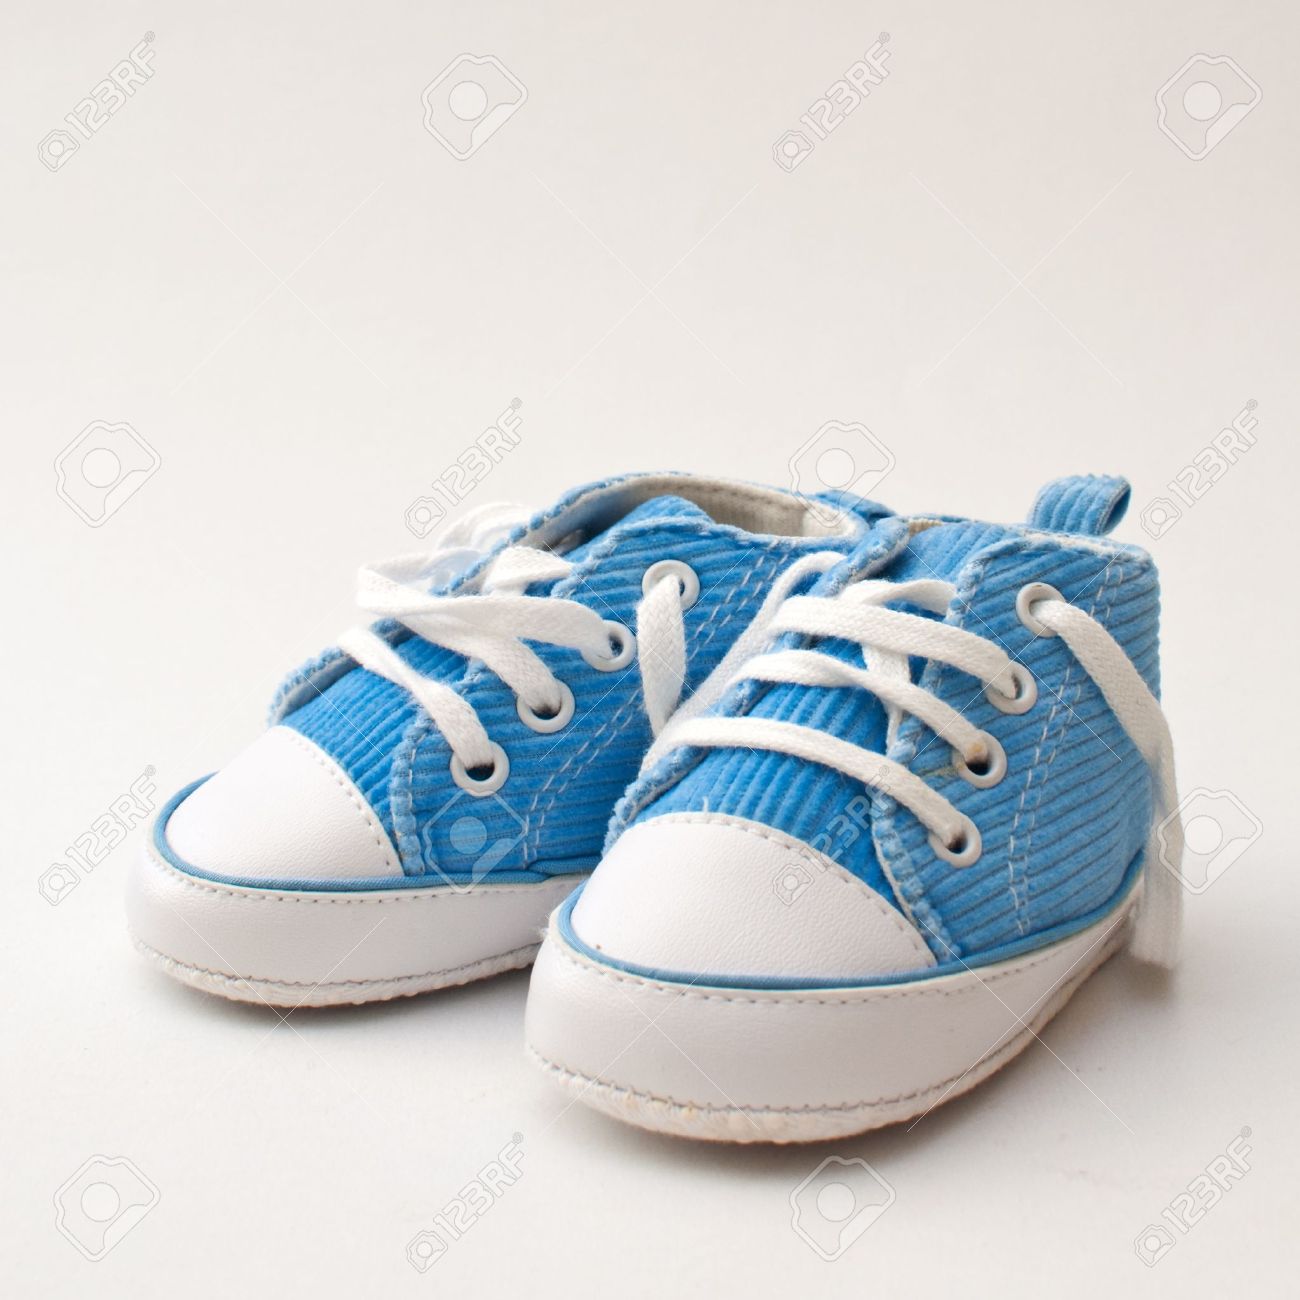 pair of blue and white baby sneakers over a light gray background stock LSZVJFM